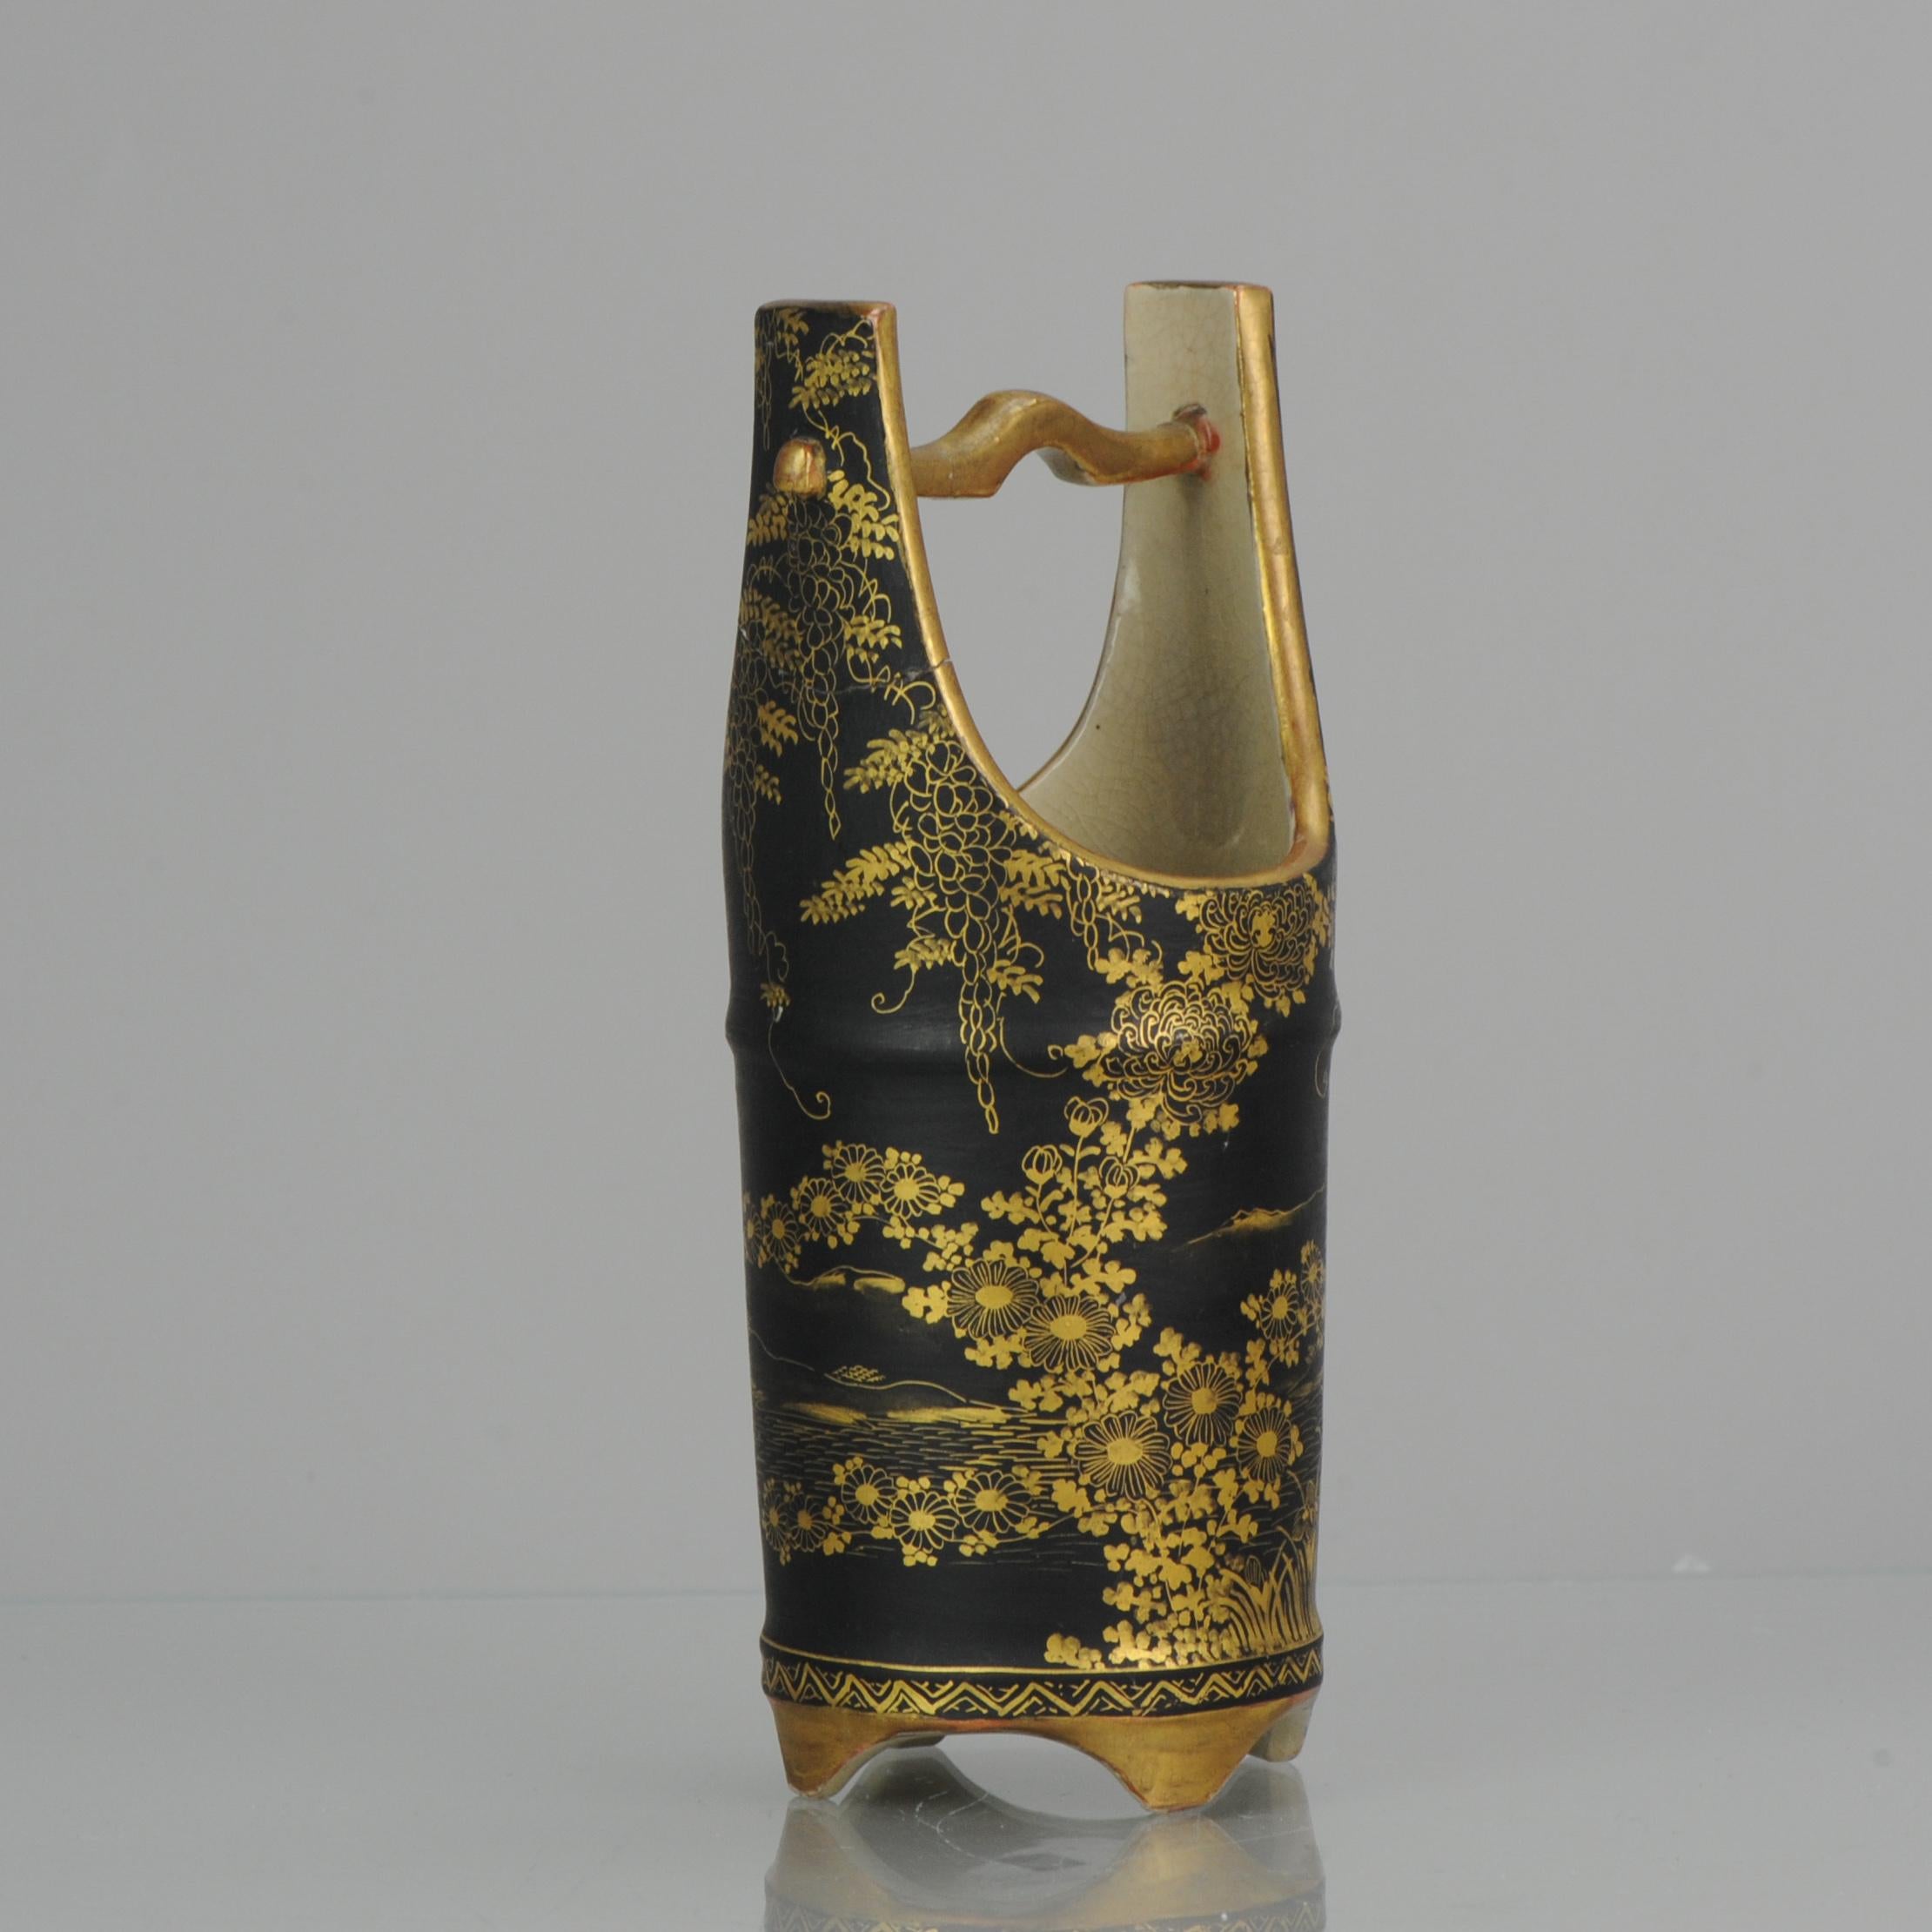 This is a rare and unusual Japanese Satsuma Basket vase from the Meiji Period (1868-1911). It is superbly decorated with a finely detailed Japanese landscape in gold on black background with also Grape vines. The vase is signed on the base.